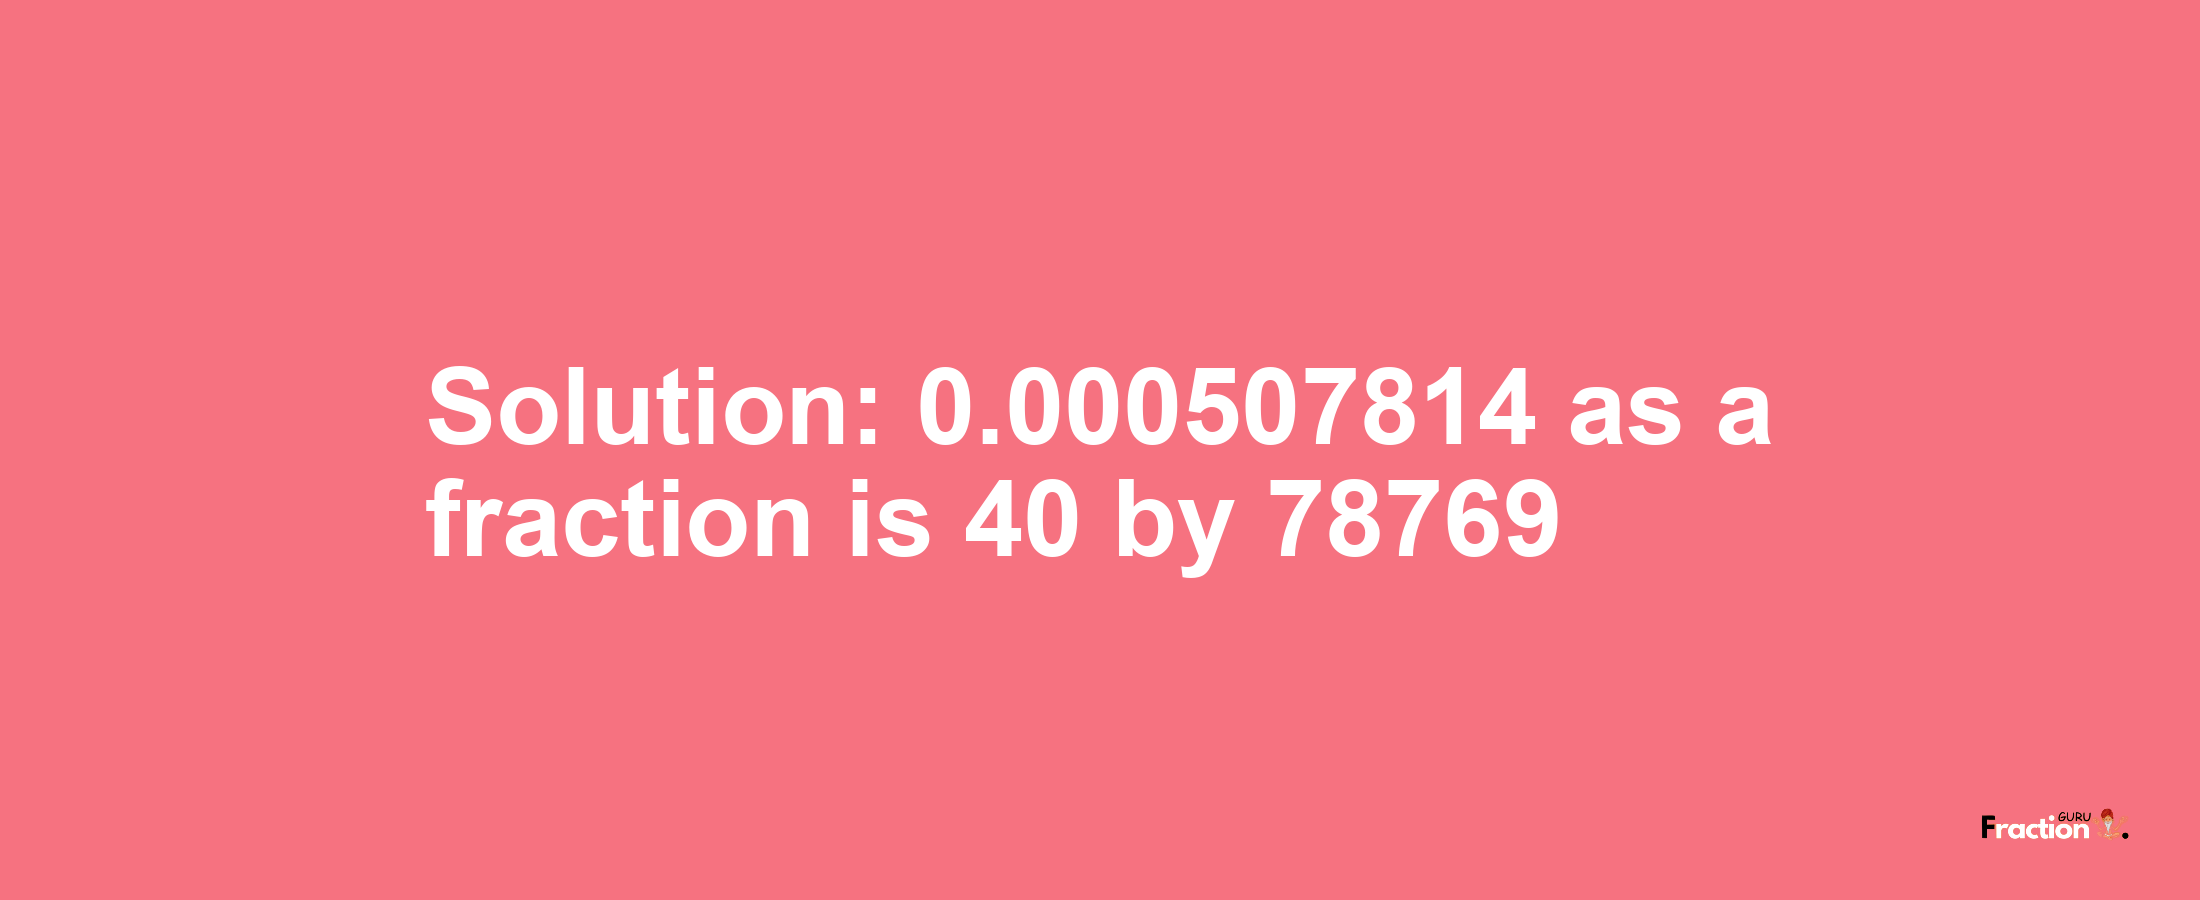 Solution:0.000507814 as a fraction is 40/78769